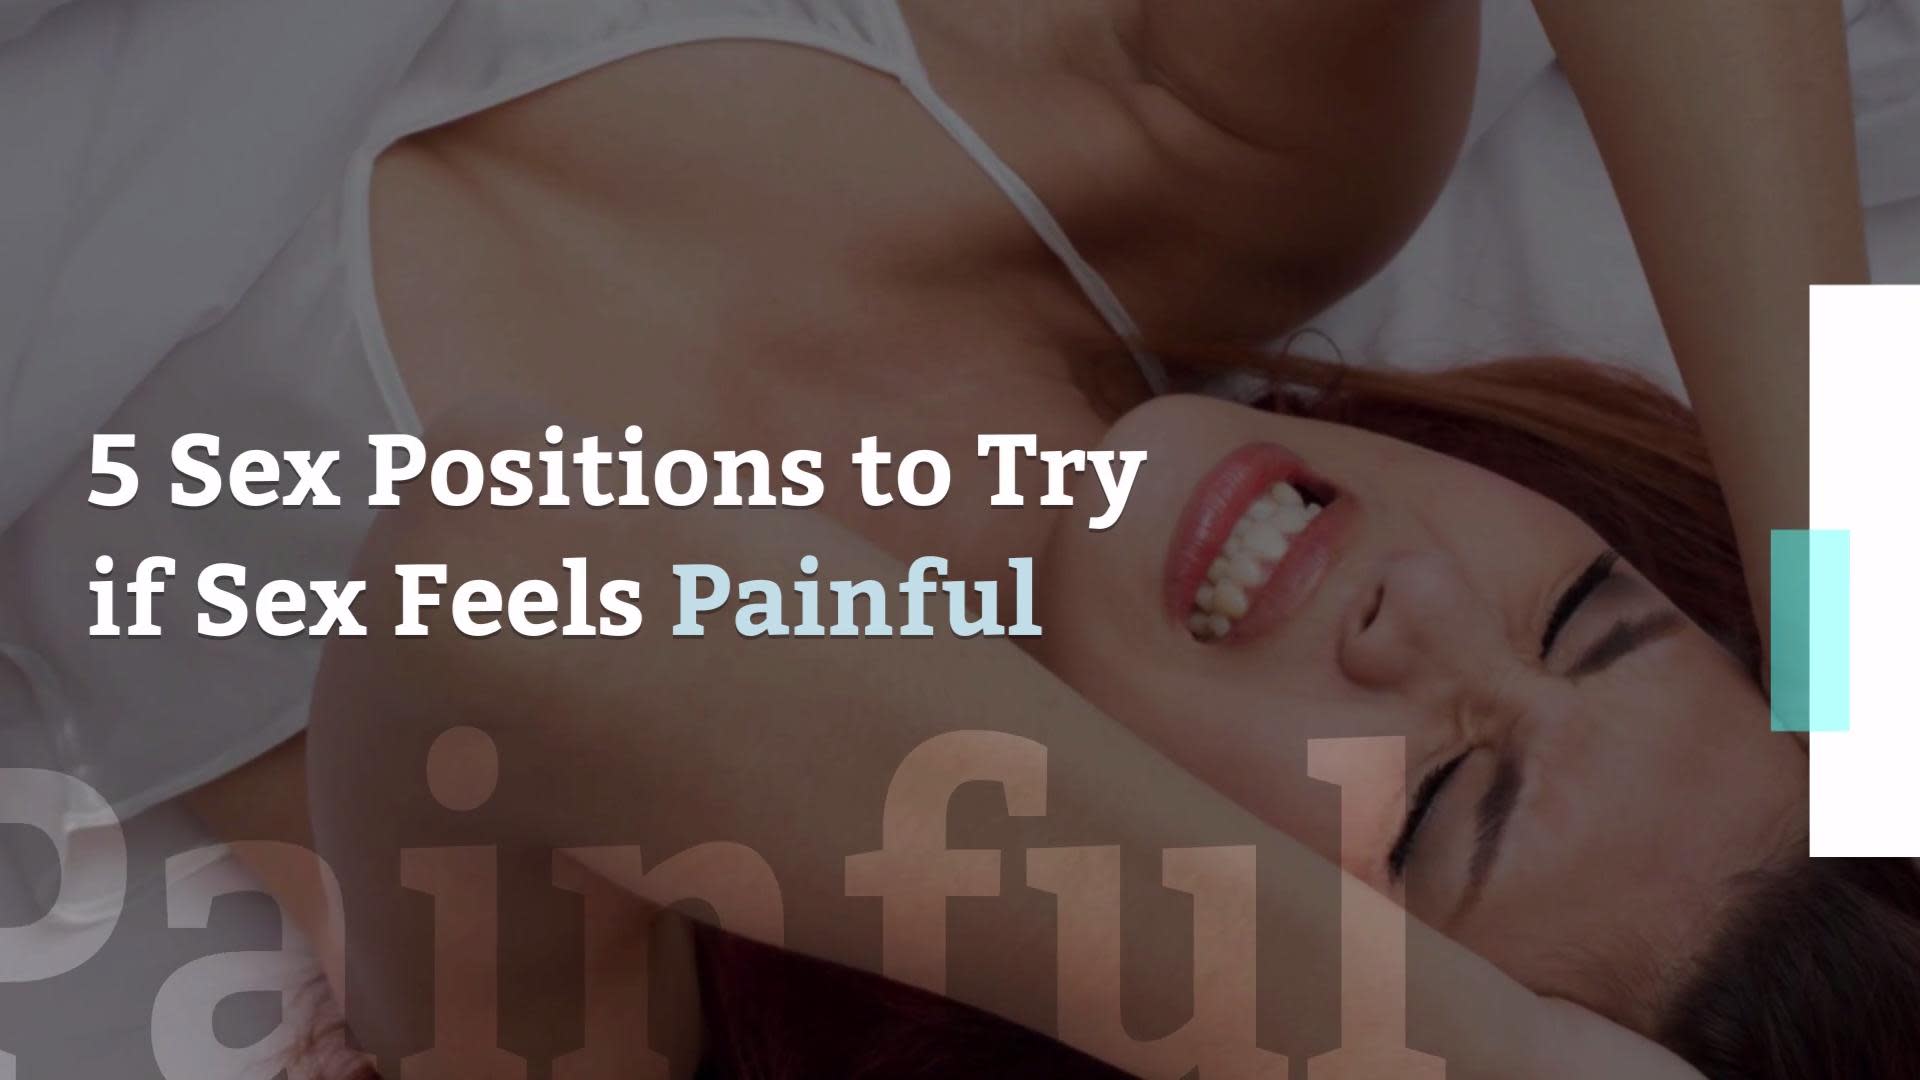 6 Sex Positions to Try if Sex Is Painful